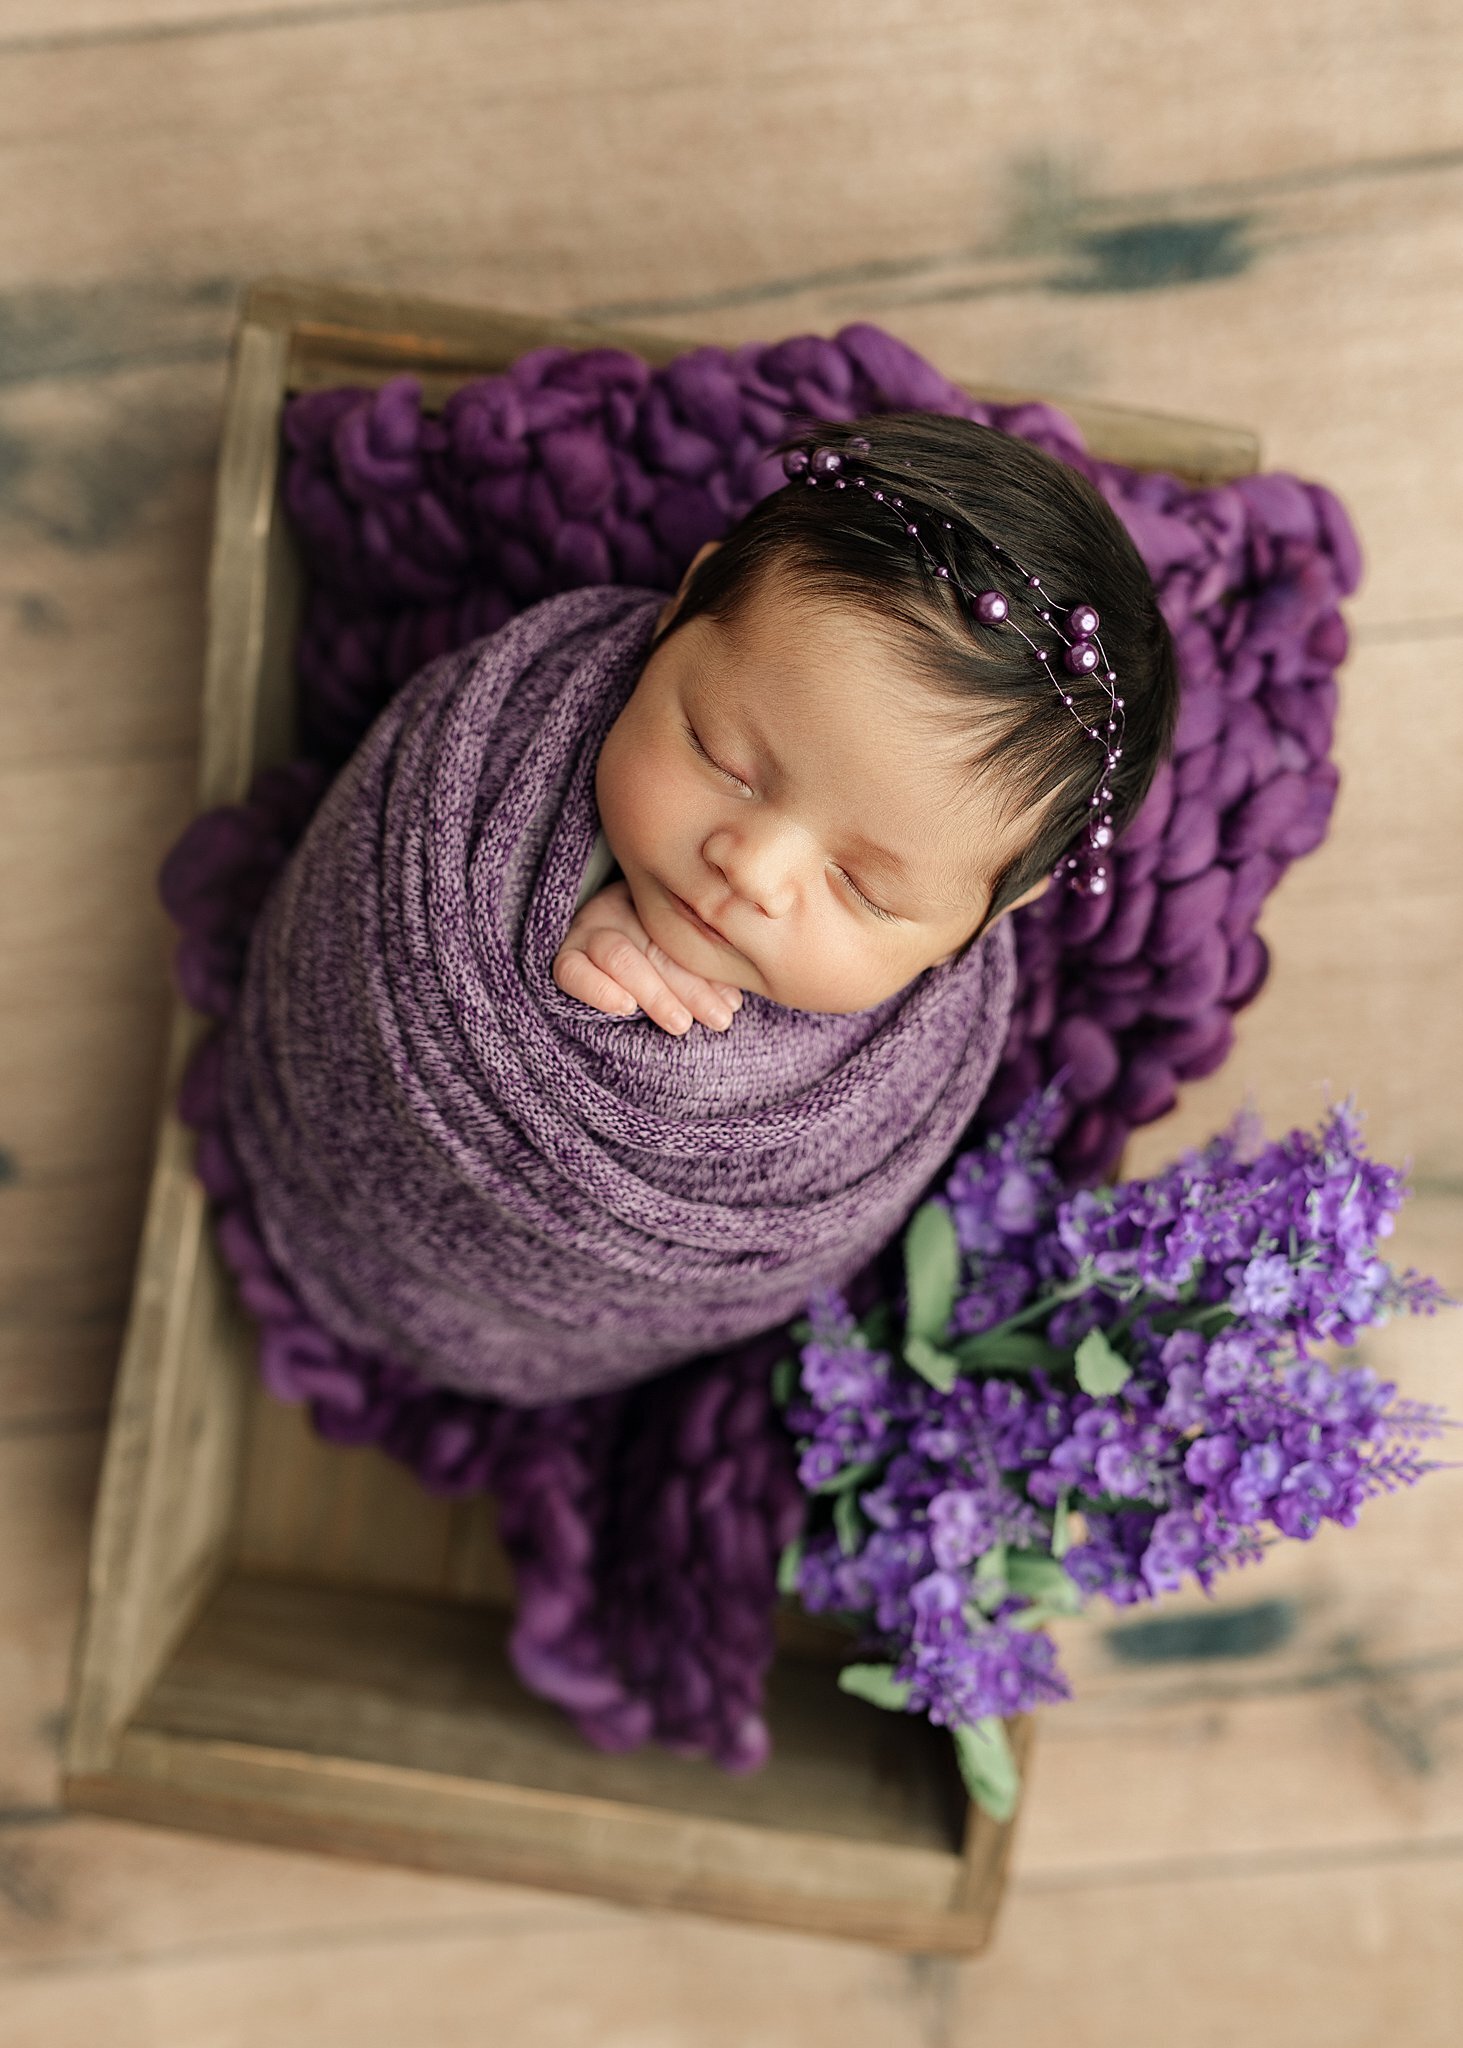 Quad city Newborn baby wrapped in purple, in a box prop with flowers